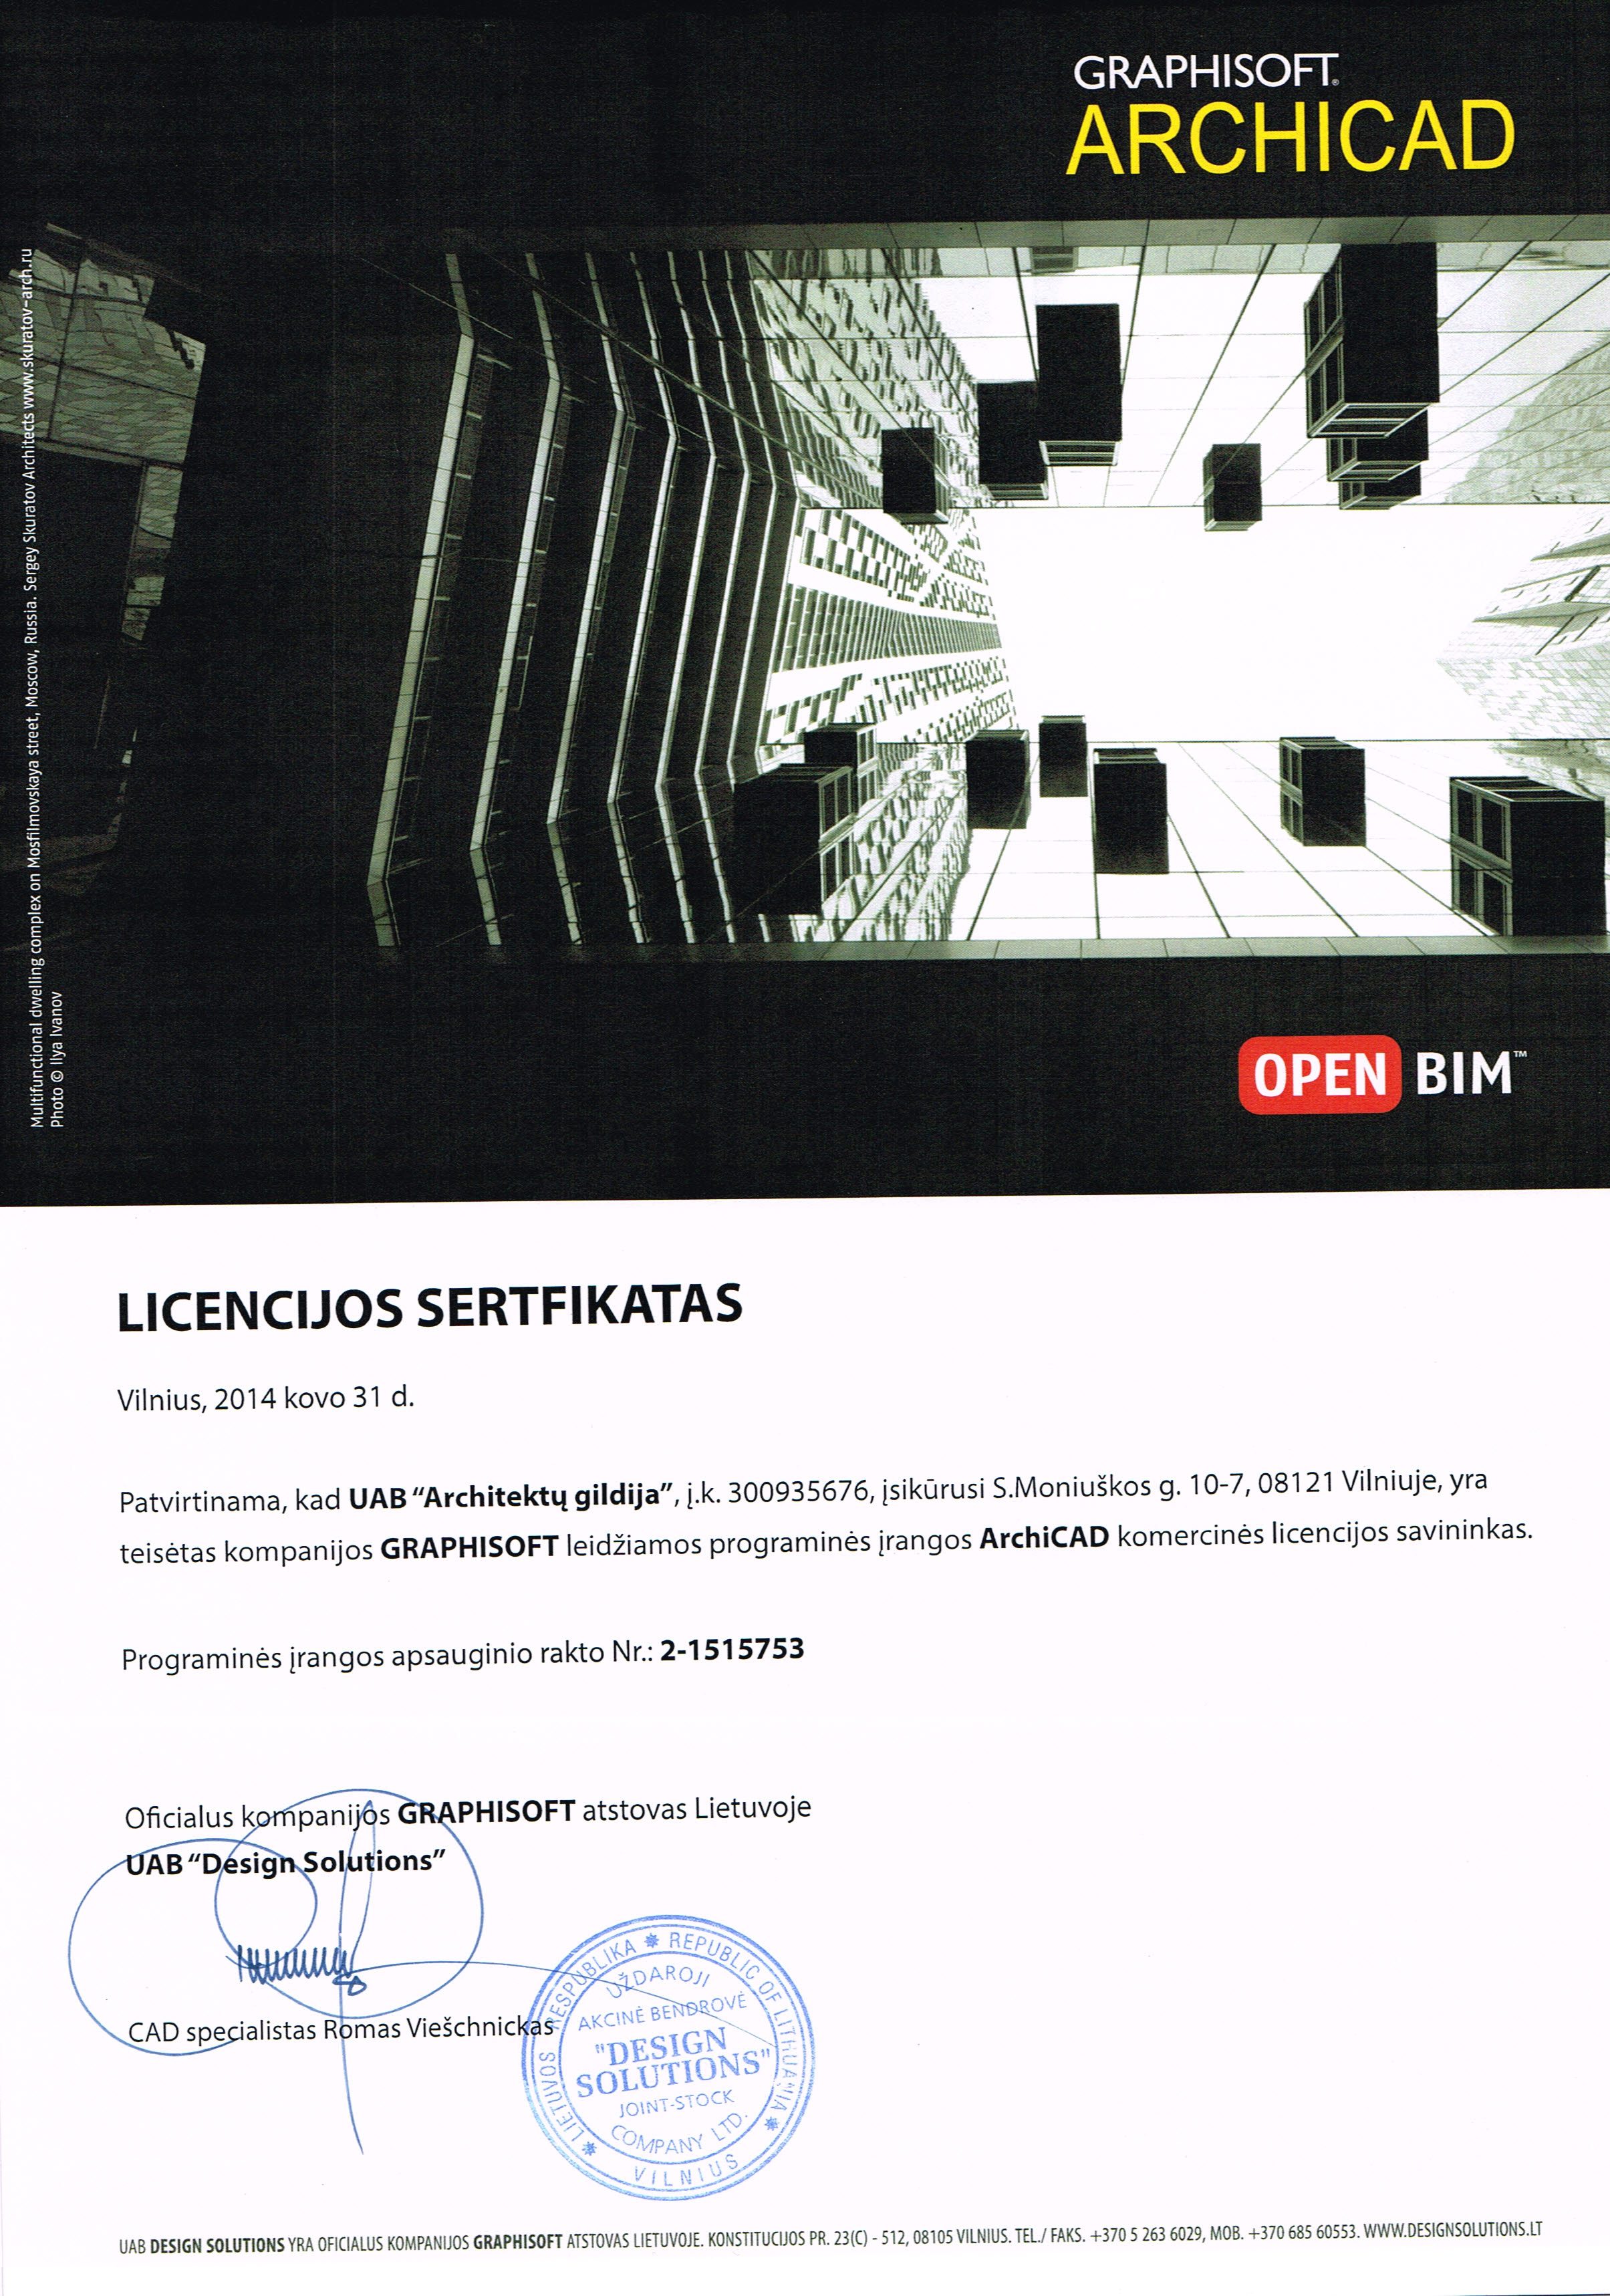 Archicad licenses by ArchicadTeam.com